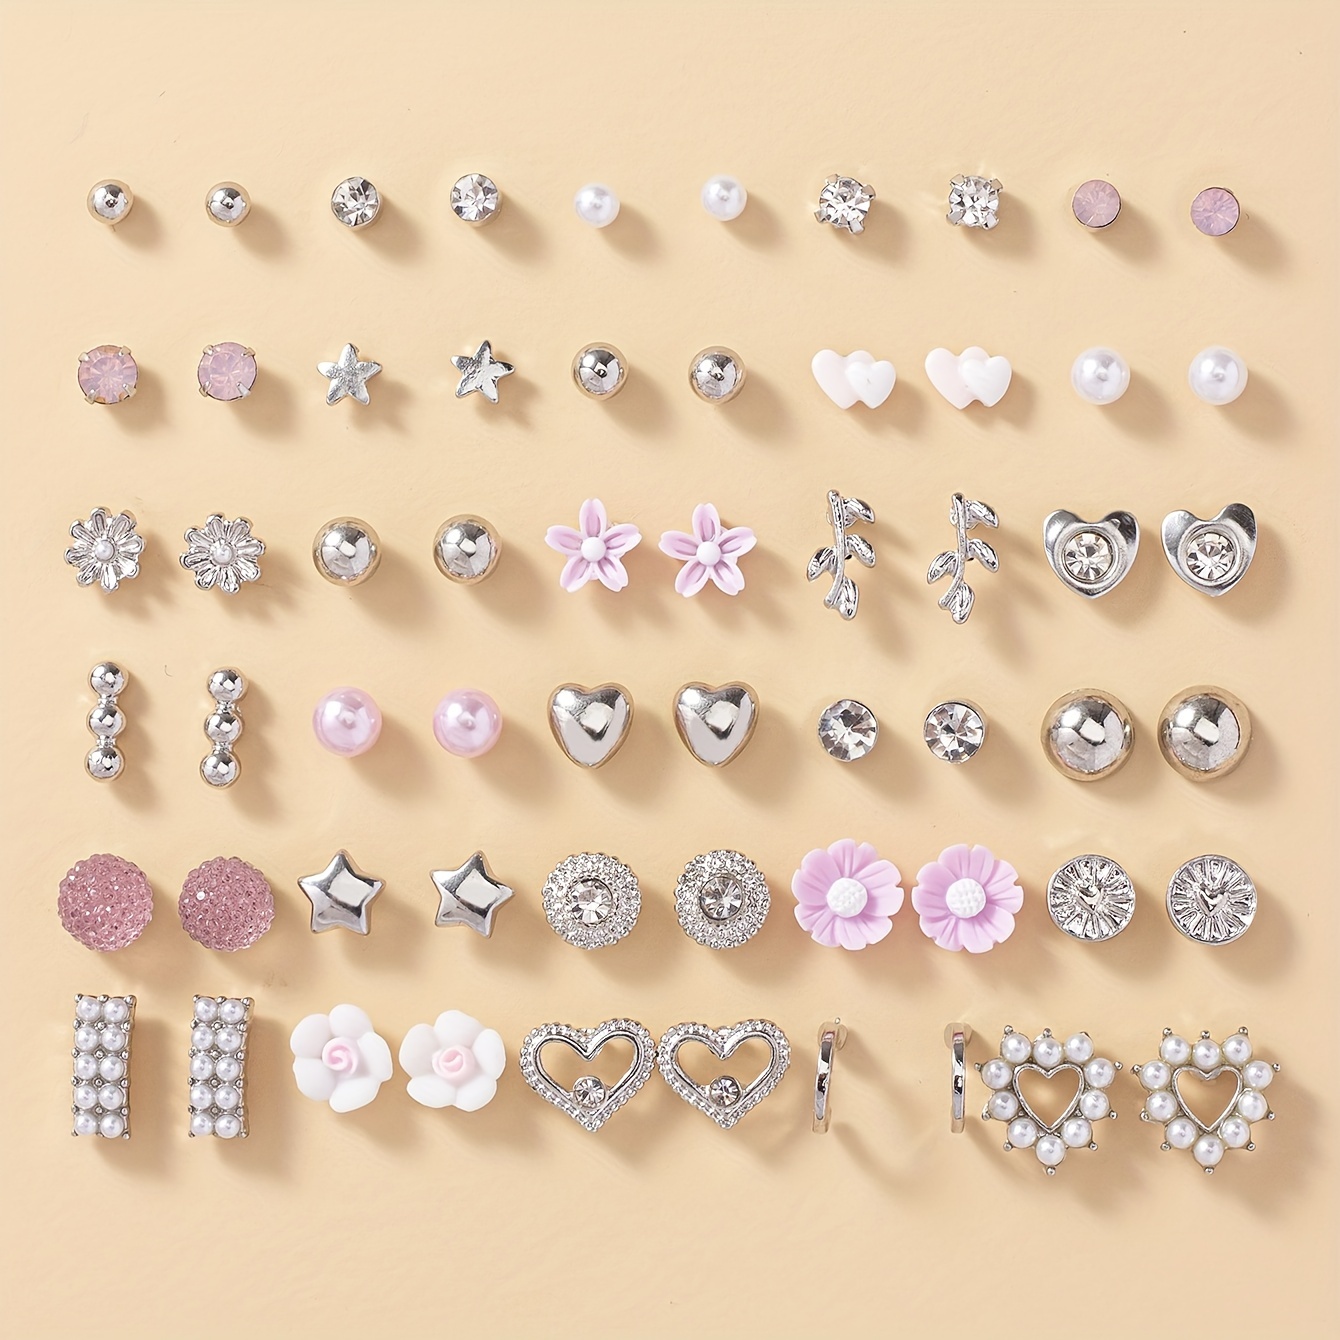 

30 Pairs Shiny Rhinestone Faux Pearl Decor Stud Earrings Set Elegant Cute Style Zinc Alloy Silver Plated Jewelry Daily Casual